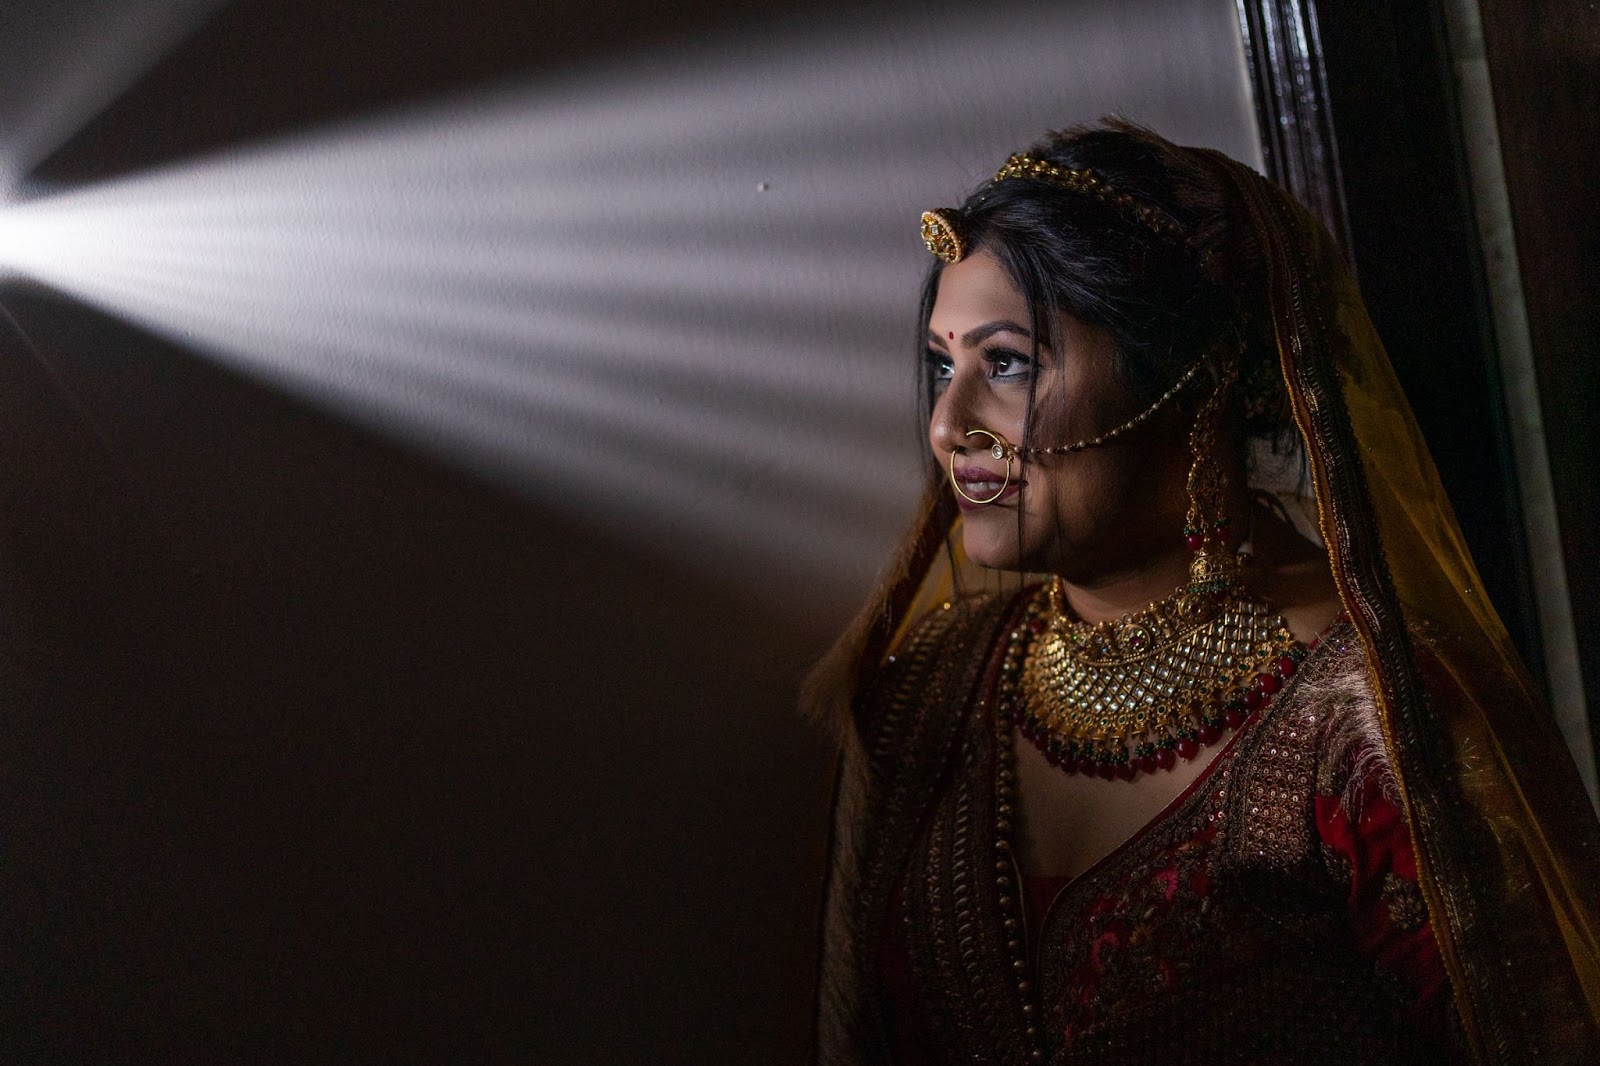 Talented wedding photographer Indore capturing candid moments - Harsh Studio Photography 